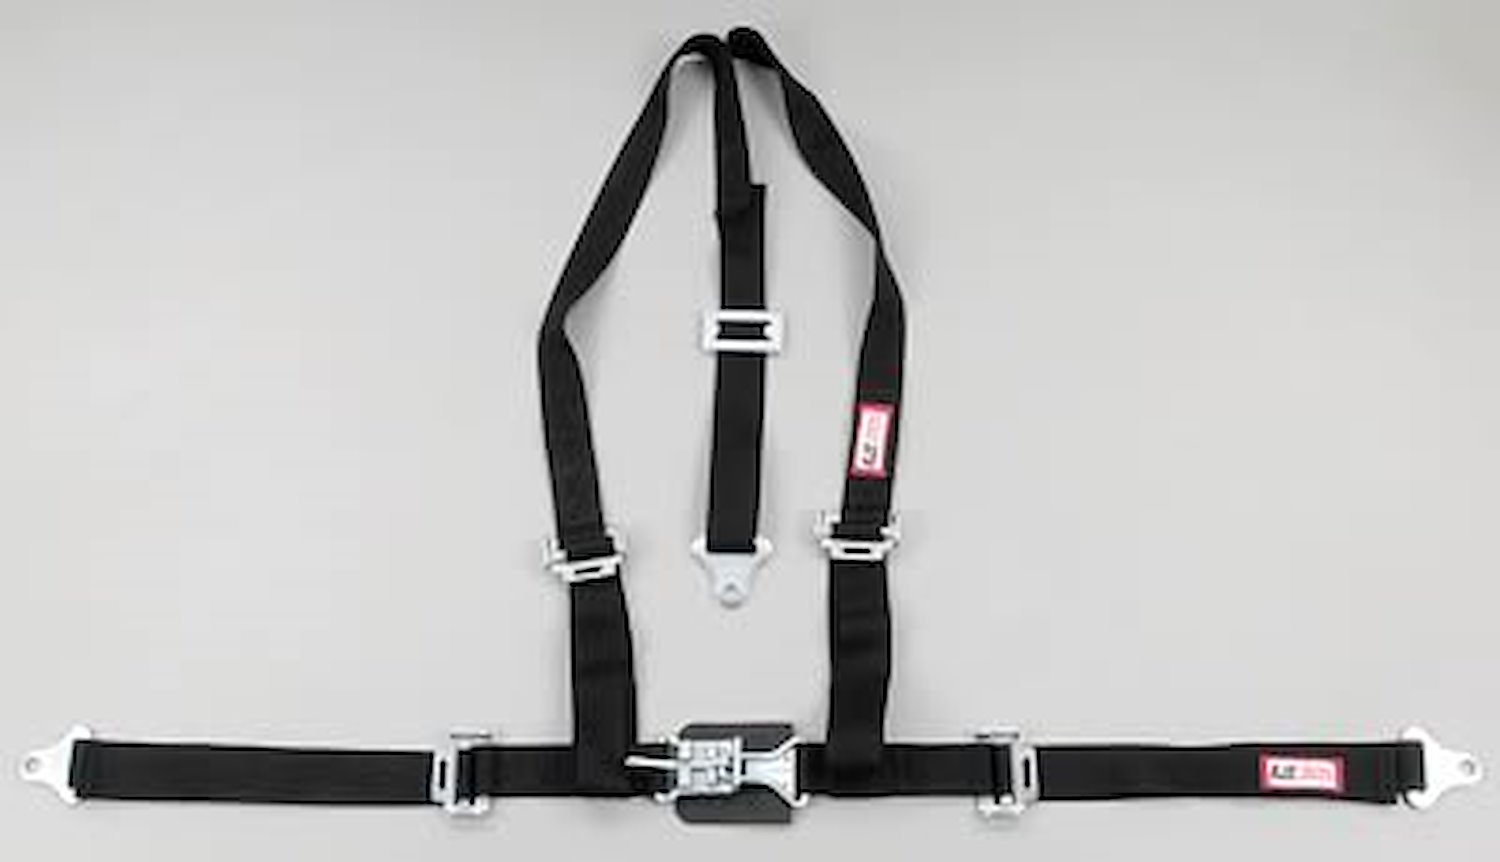 NON-SFI L&L HARNESS 2 PULL UP Lap Belt SNAP SEWN IN 2 S.H. INDIVIDUAL FLOOR Mount w/STERNUM STRAP WRAP/SNAP OD GREEN